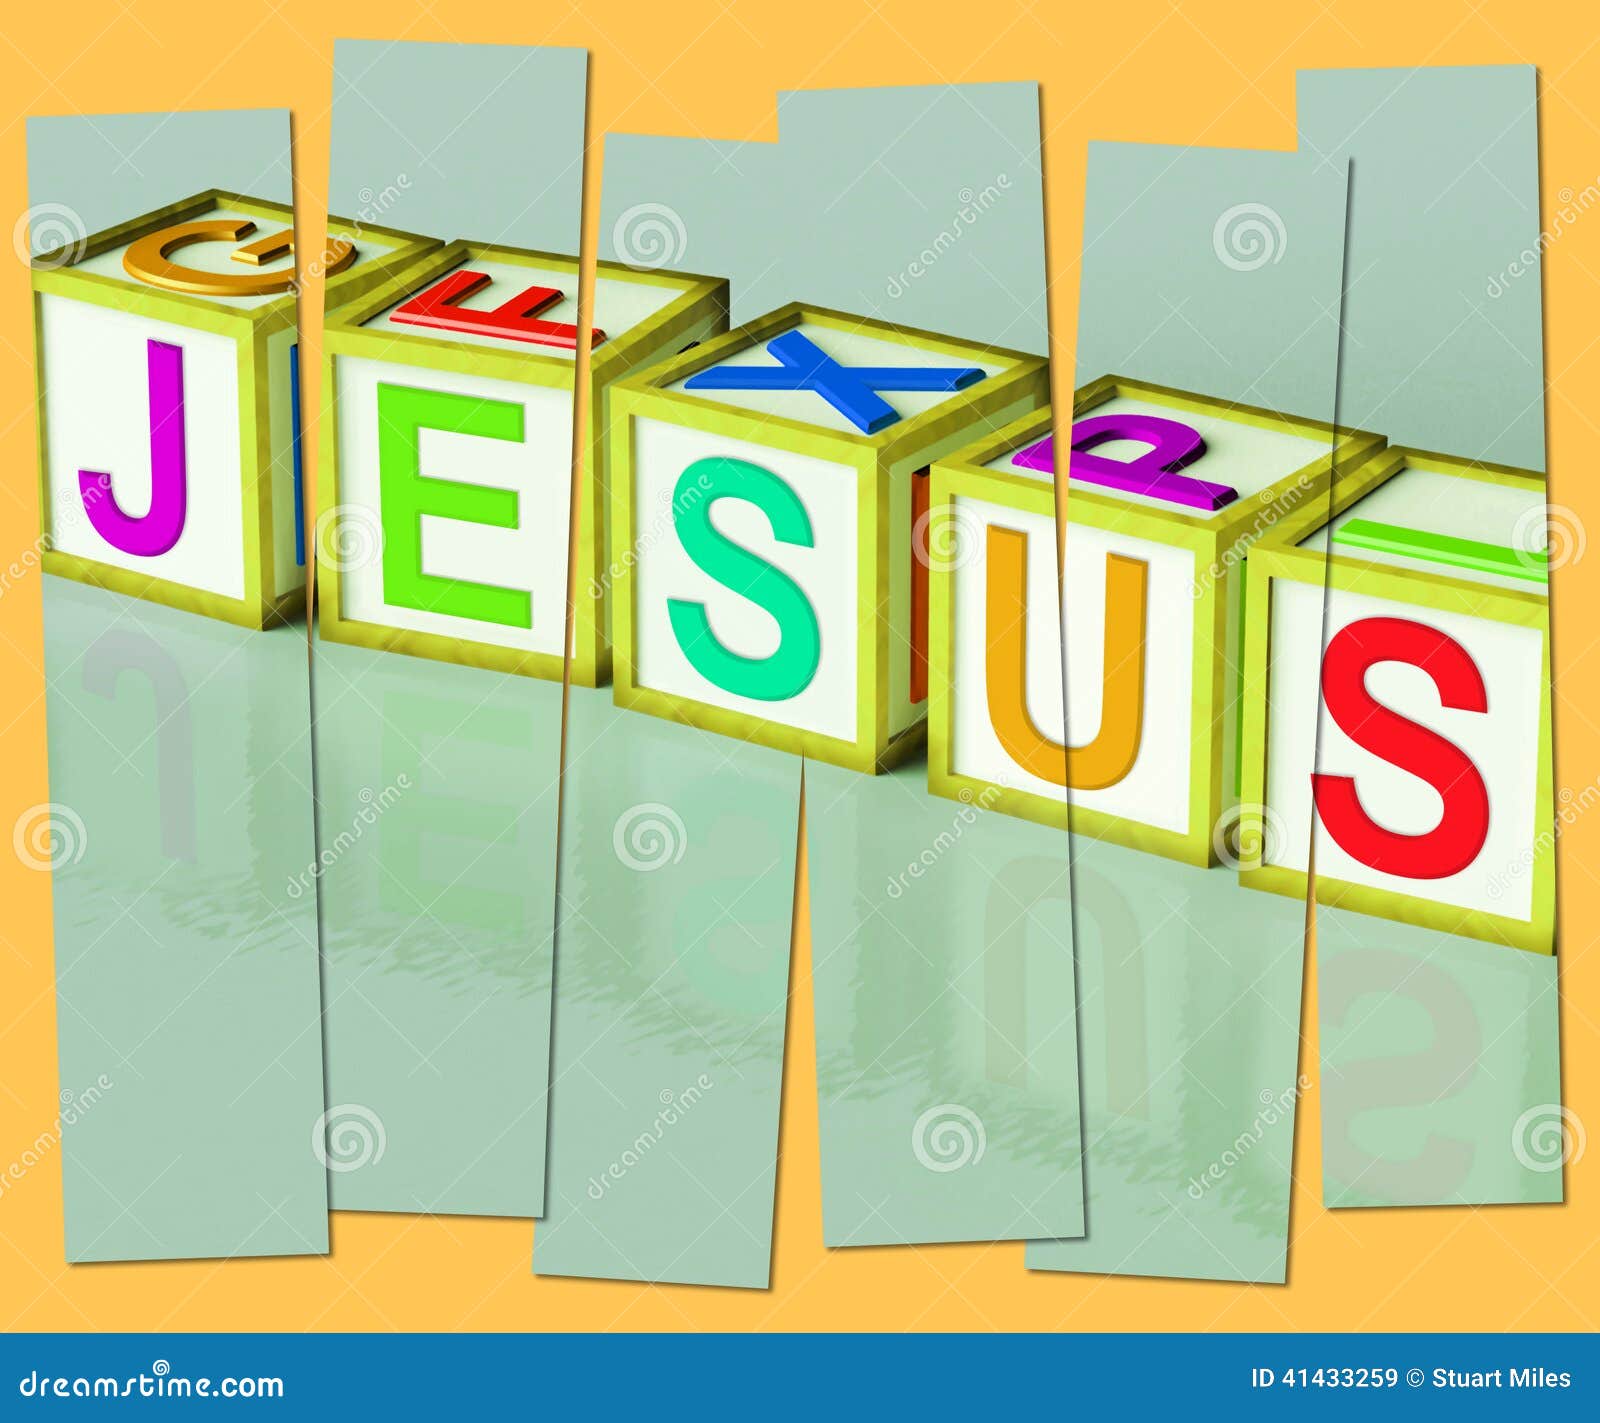 jesus word show son of god and messiah